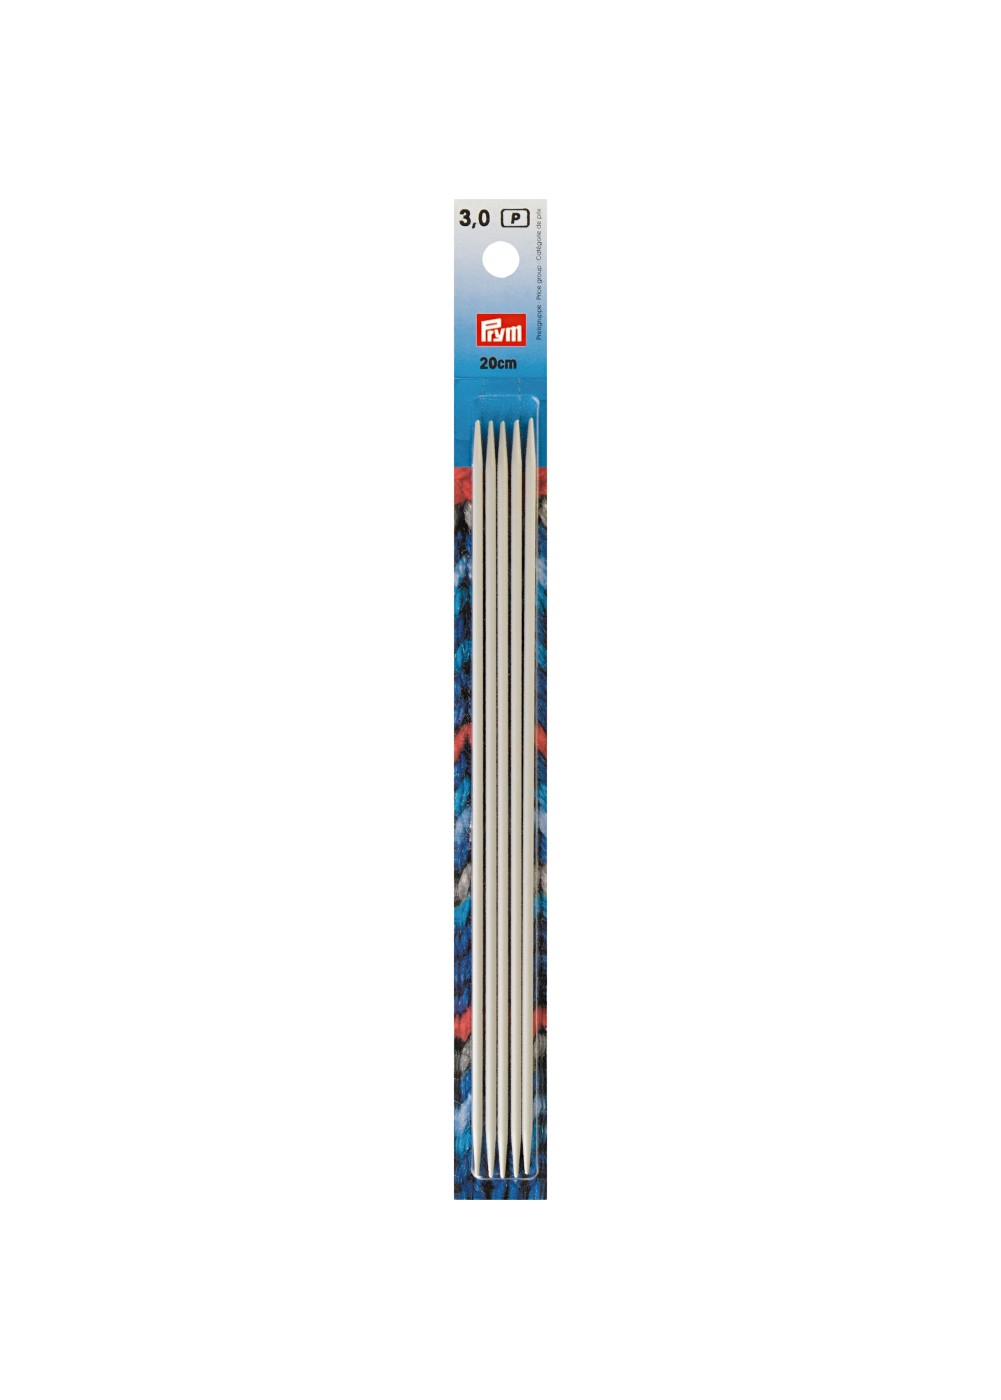 DOUBLE-POINTED KNITTING NEEDLES 3.00 MM